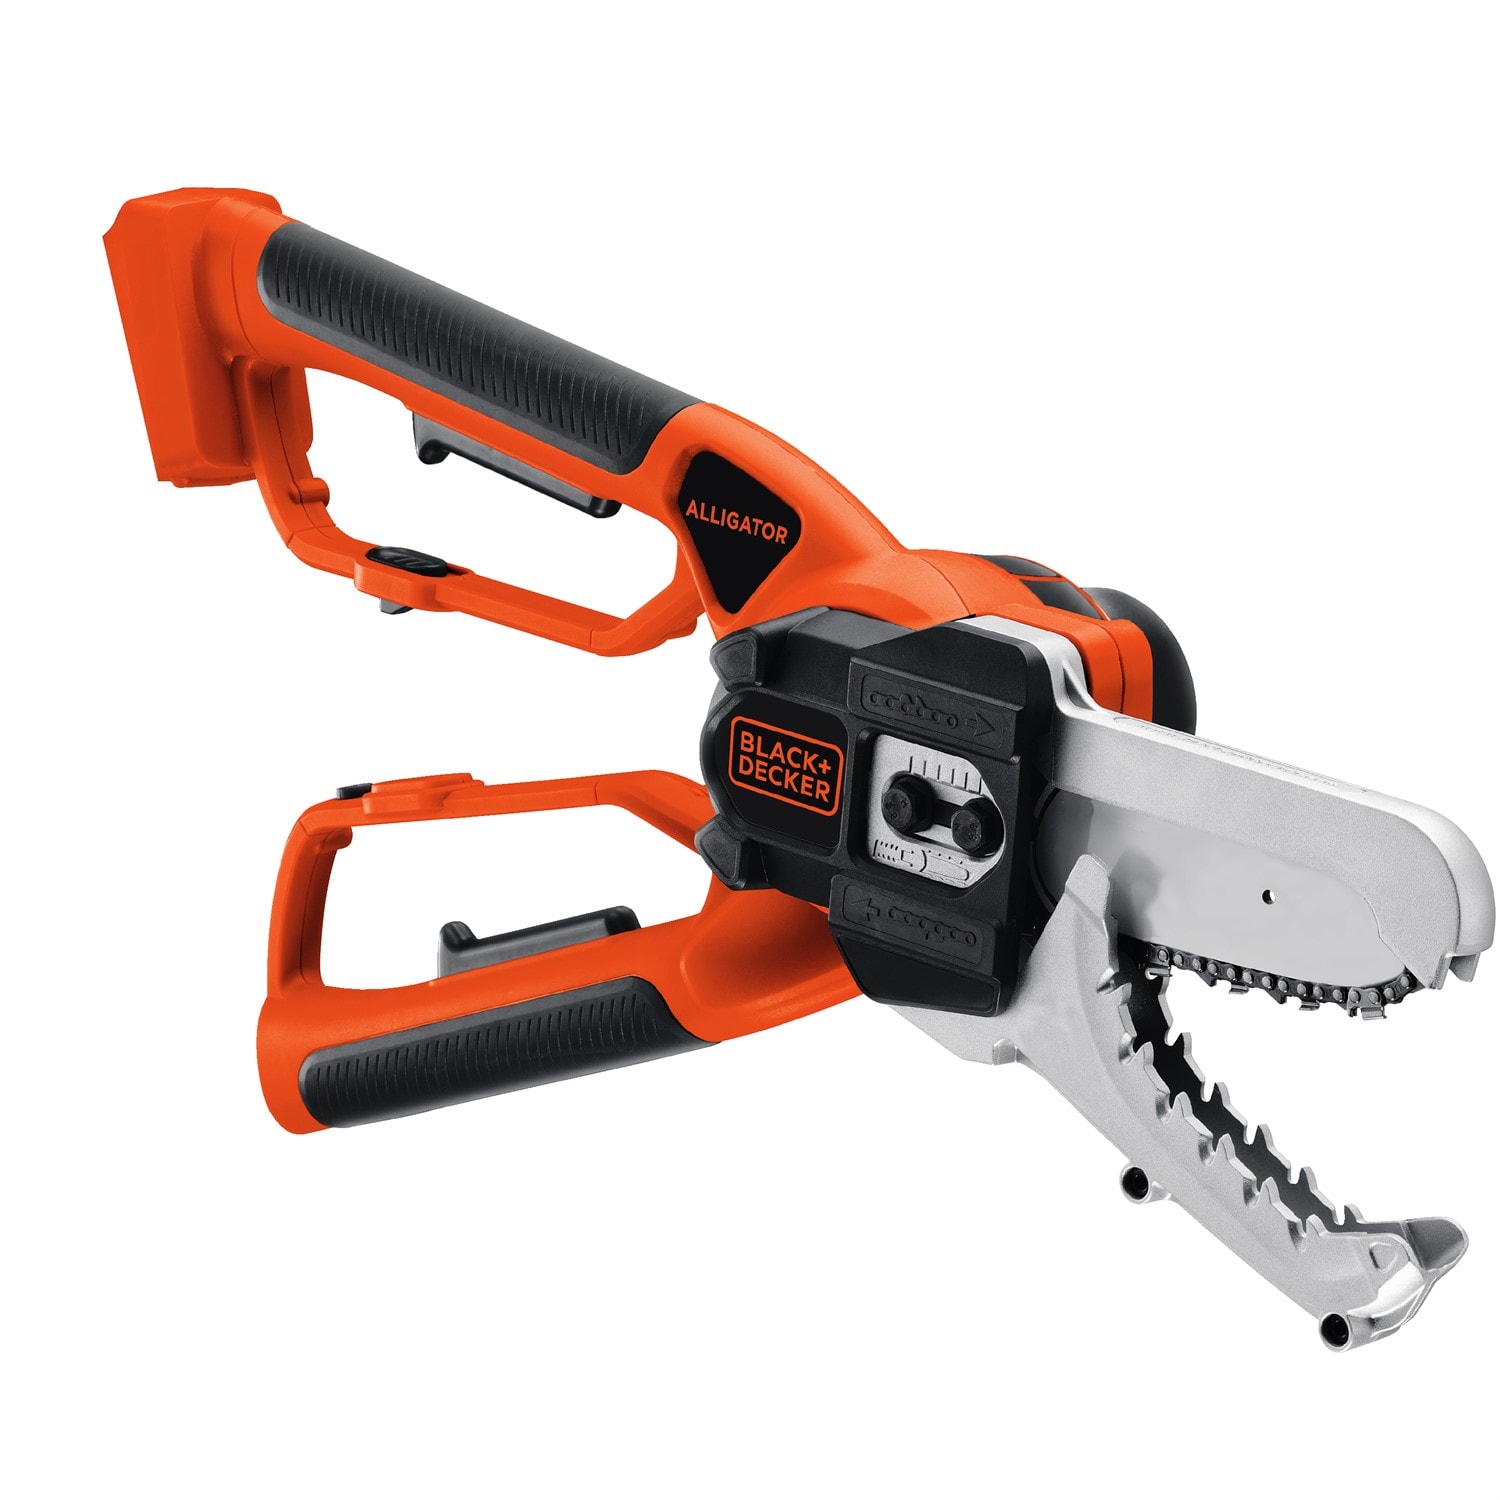 Black And Decker Trimmer Mini Chainsaw - Cultivator for Sale in